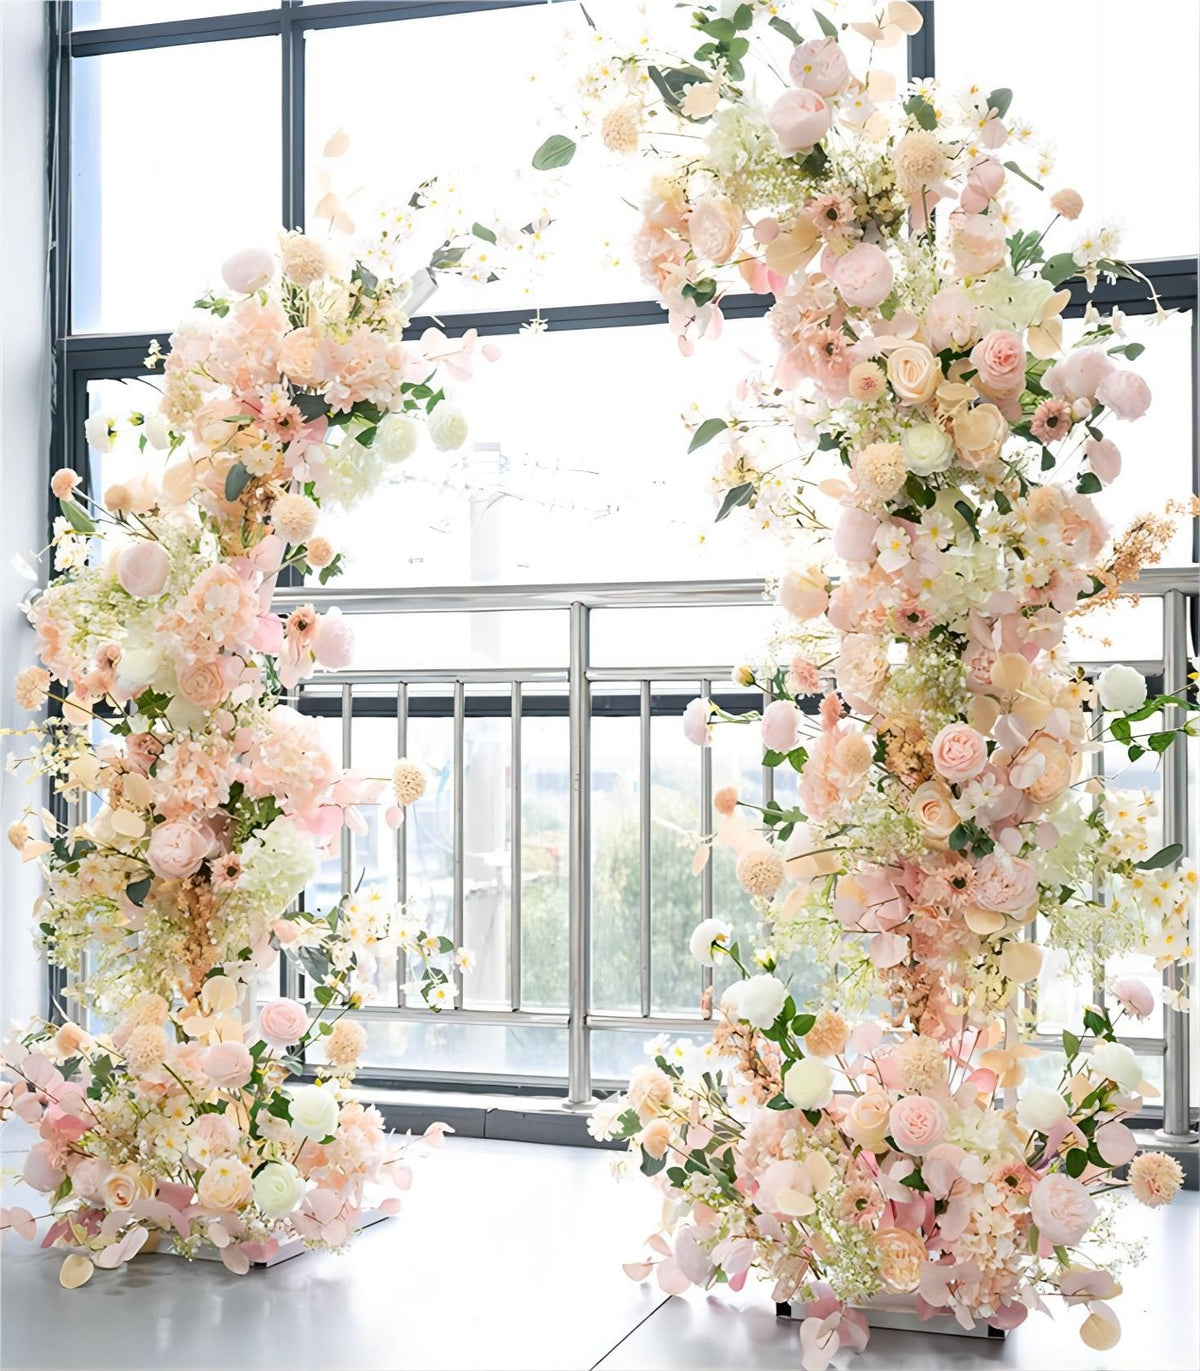 Horn Arch White Pink Peony Hydrangea Artificial Flower Wedding Party Birthday Backdrop Decor CH9686-3